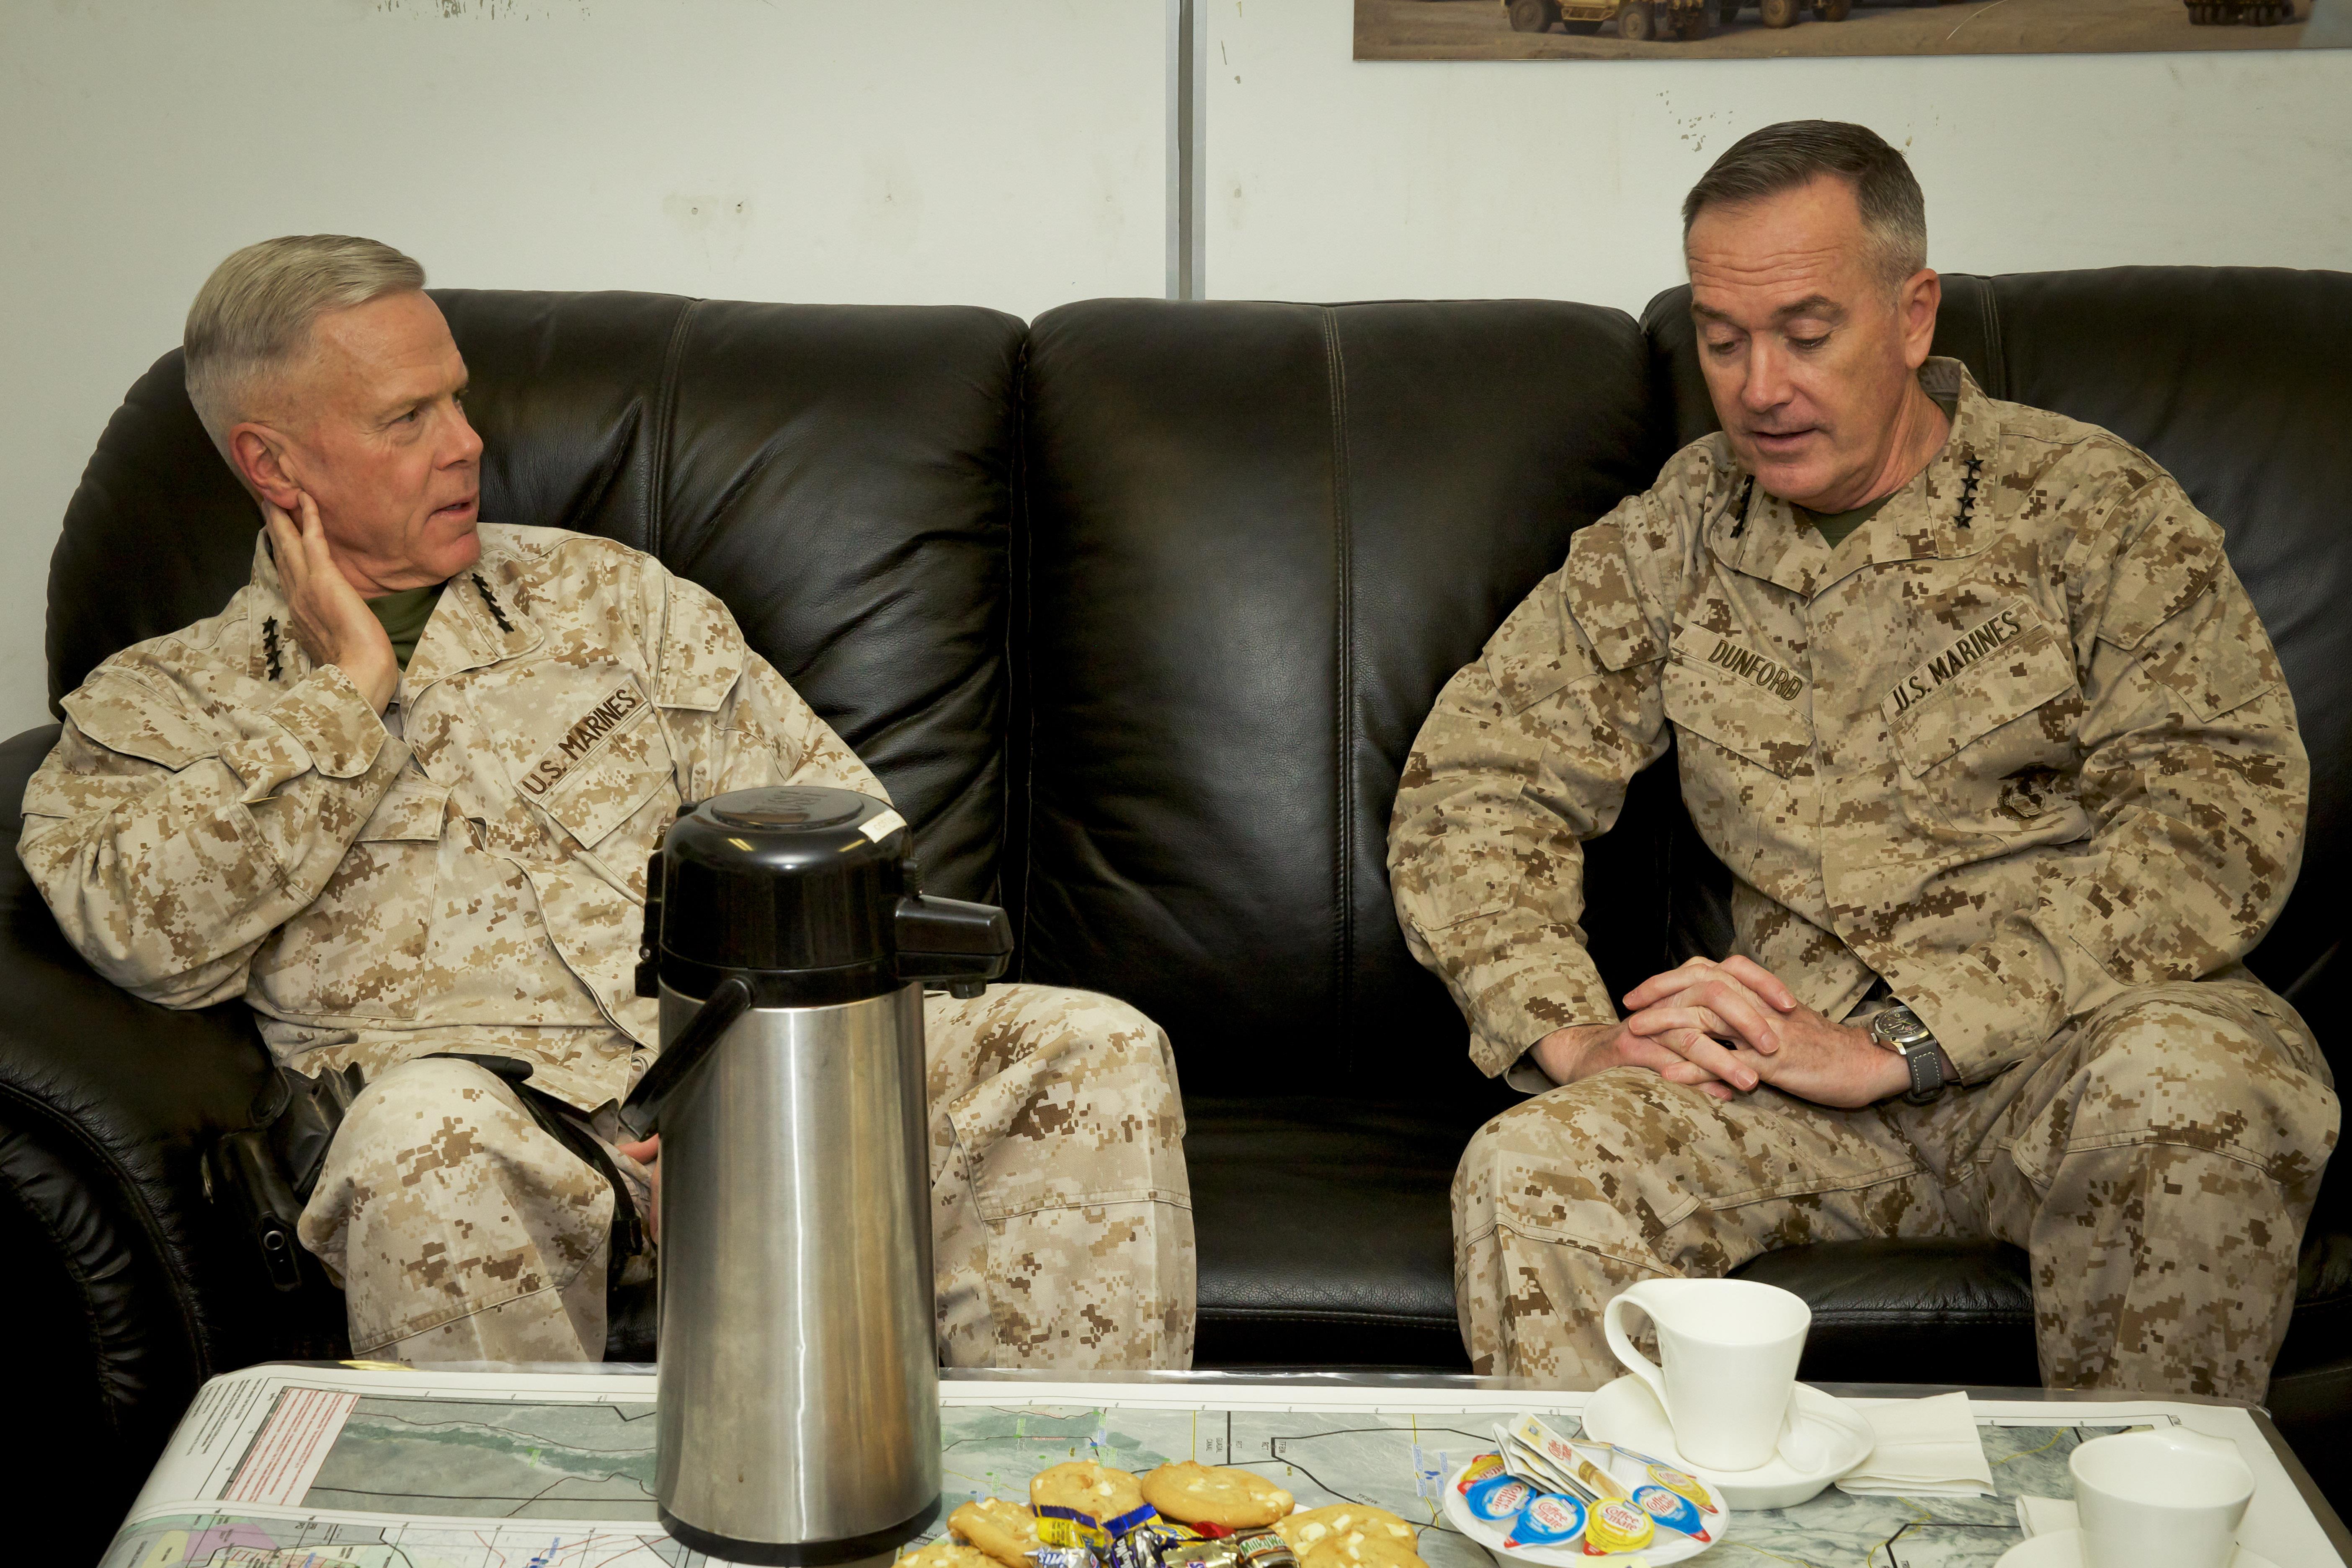 Current USMC Commandant Gen. James Amos and Dunford in Afghanistan on Feb. 18, 2014. US Marine Corps Photo